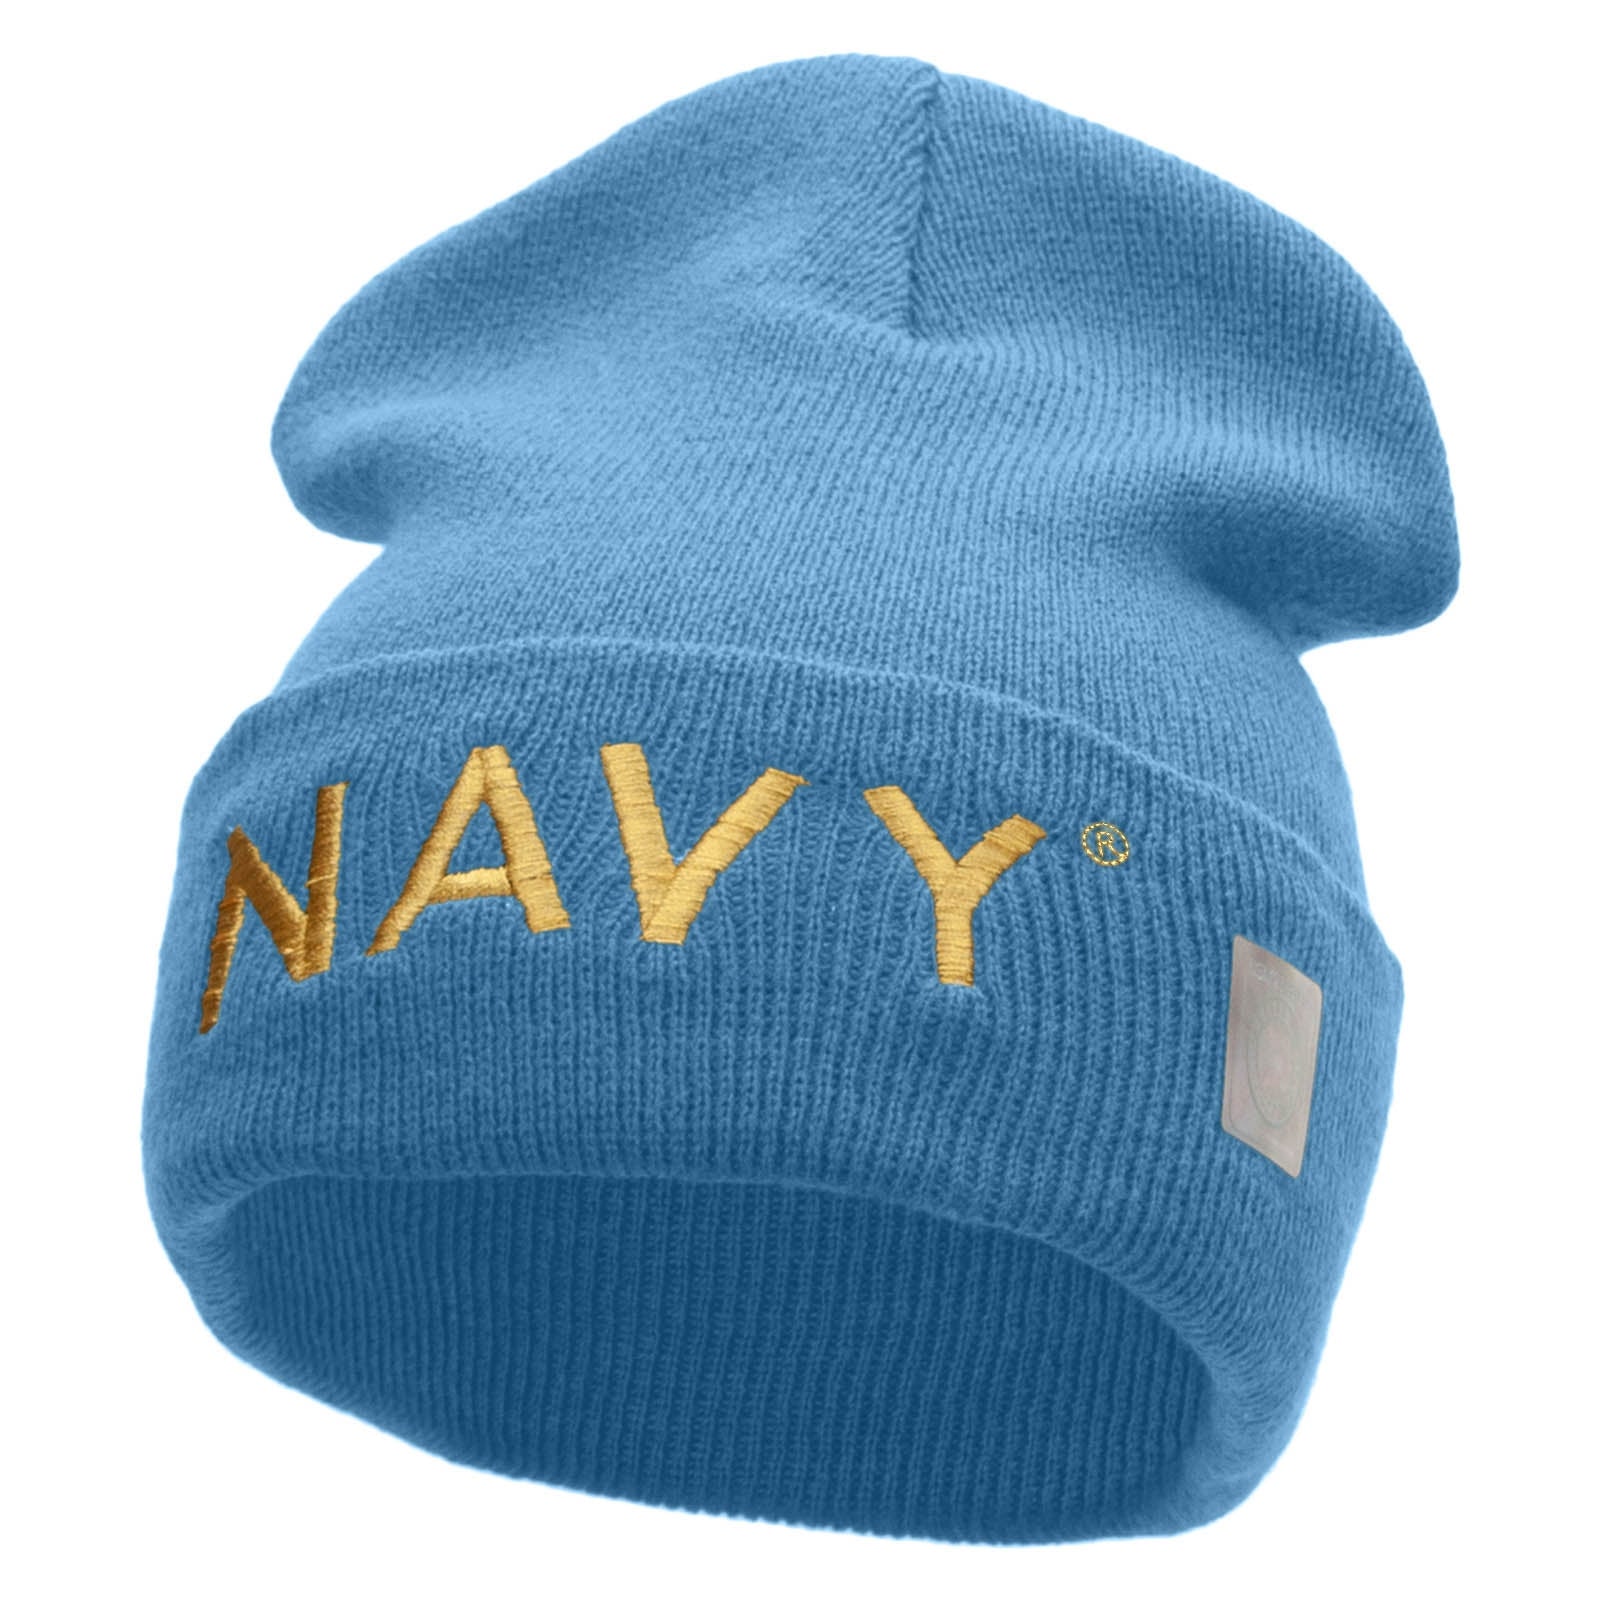 Licensed Navy Embroidered Long Knitted Beanie Made in USA - Baby Blue OSFM